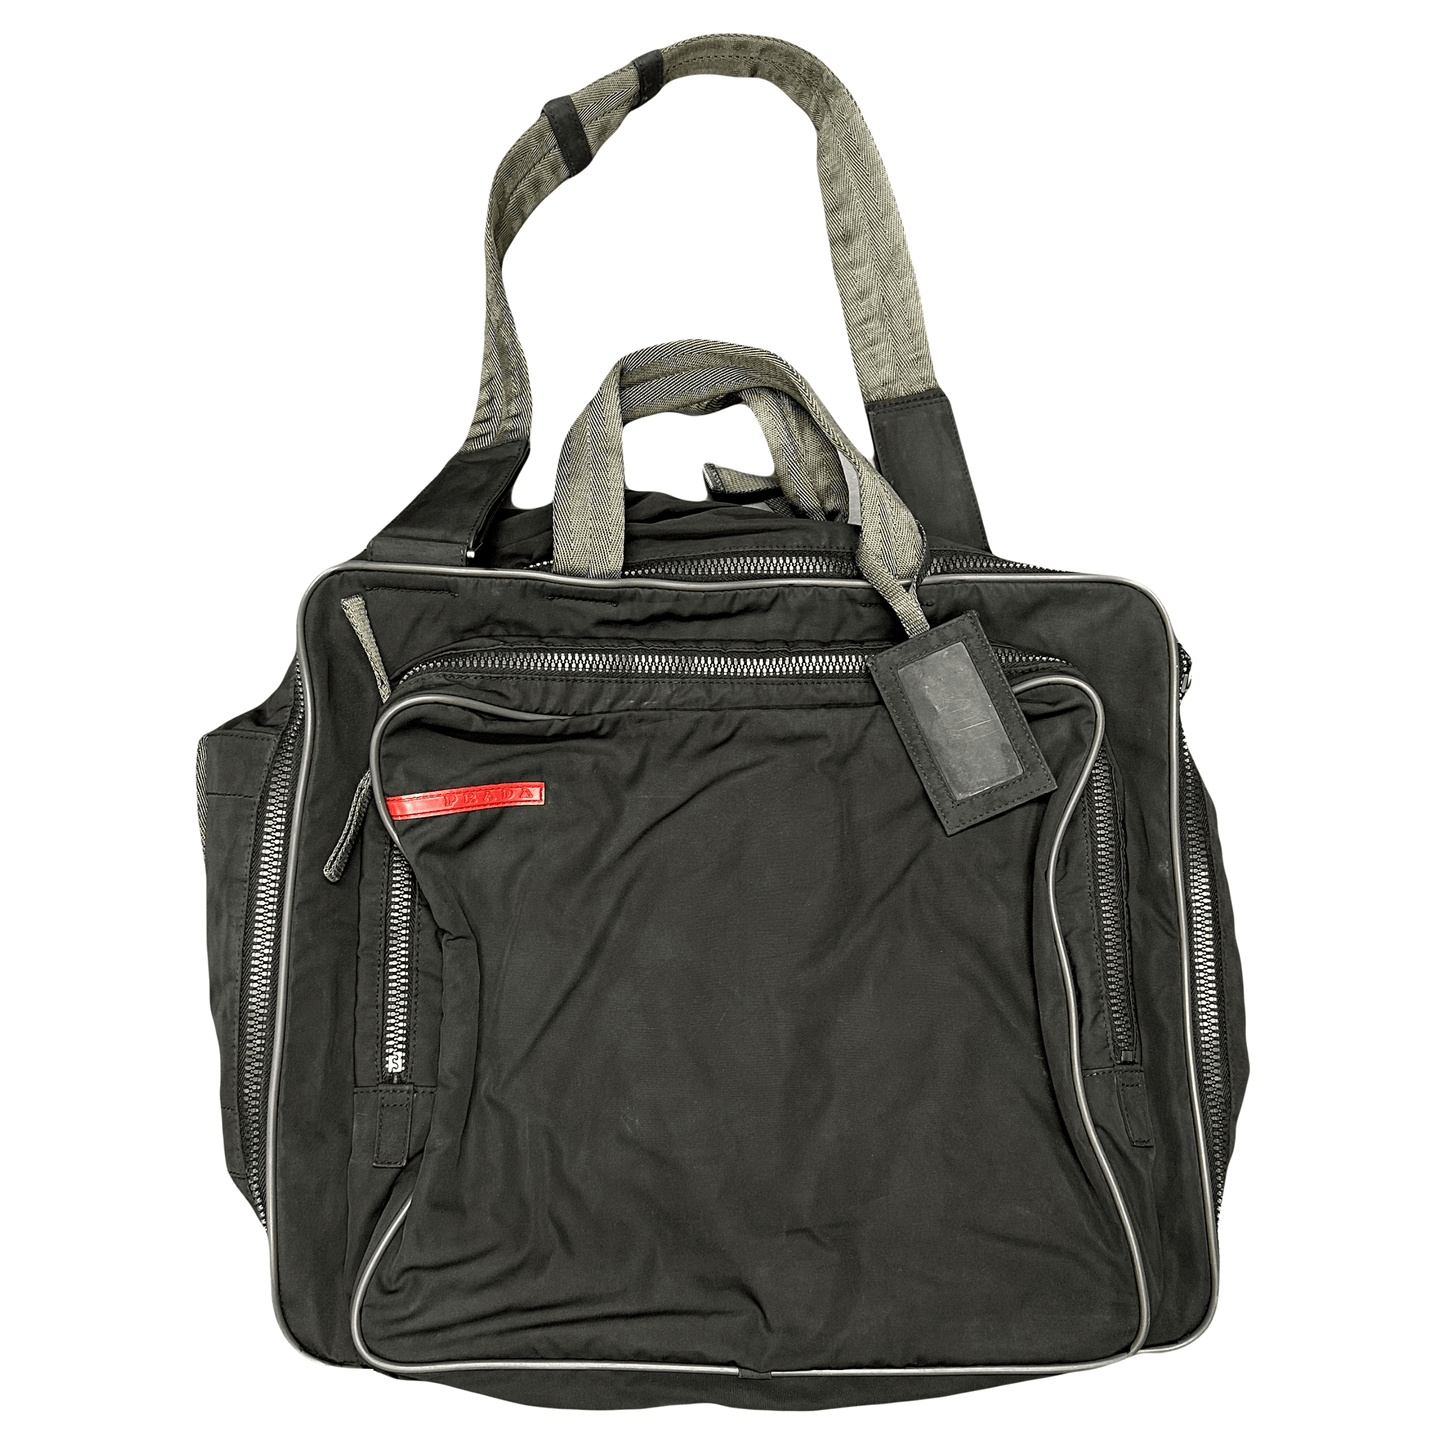 Prada Hold All Bag With Zippable Straps - Known Source